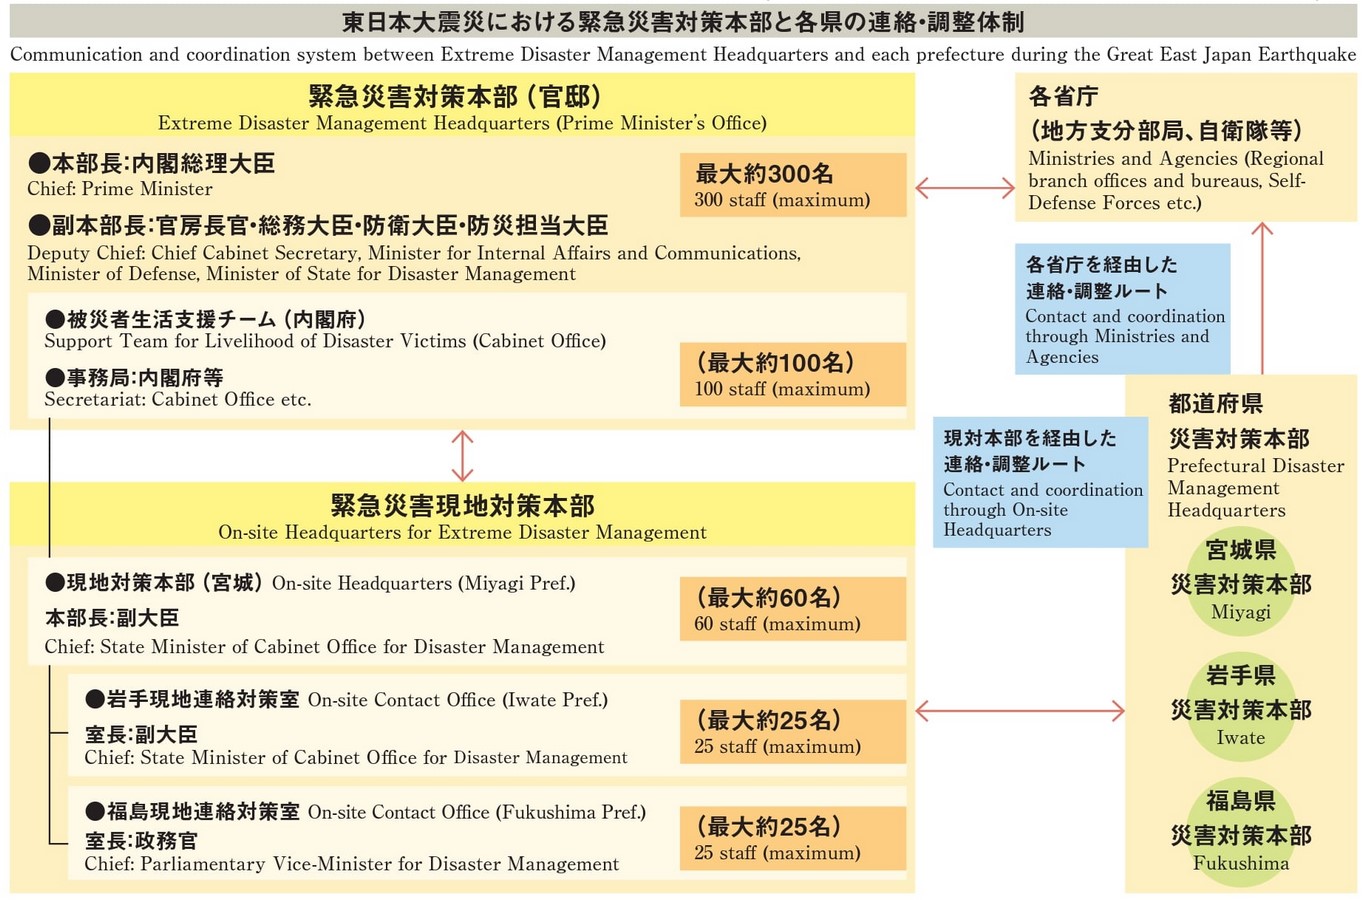 Learning disaster management from Japan - Sheet4